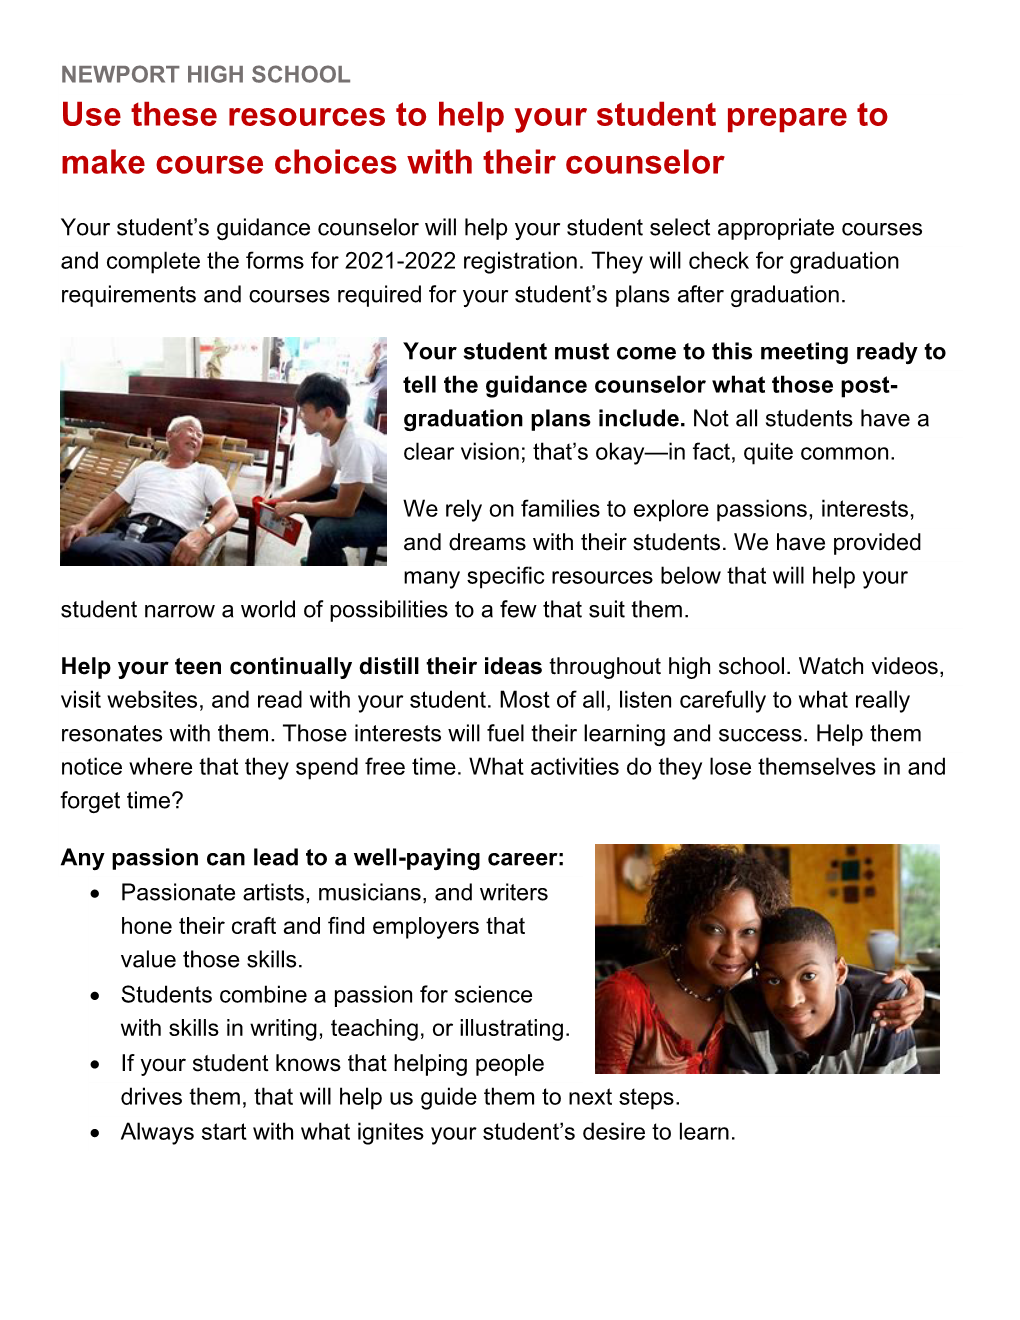 Use These Resources to Help Your Student Prepare to Make Course Choices with Their Counselor